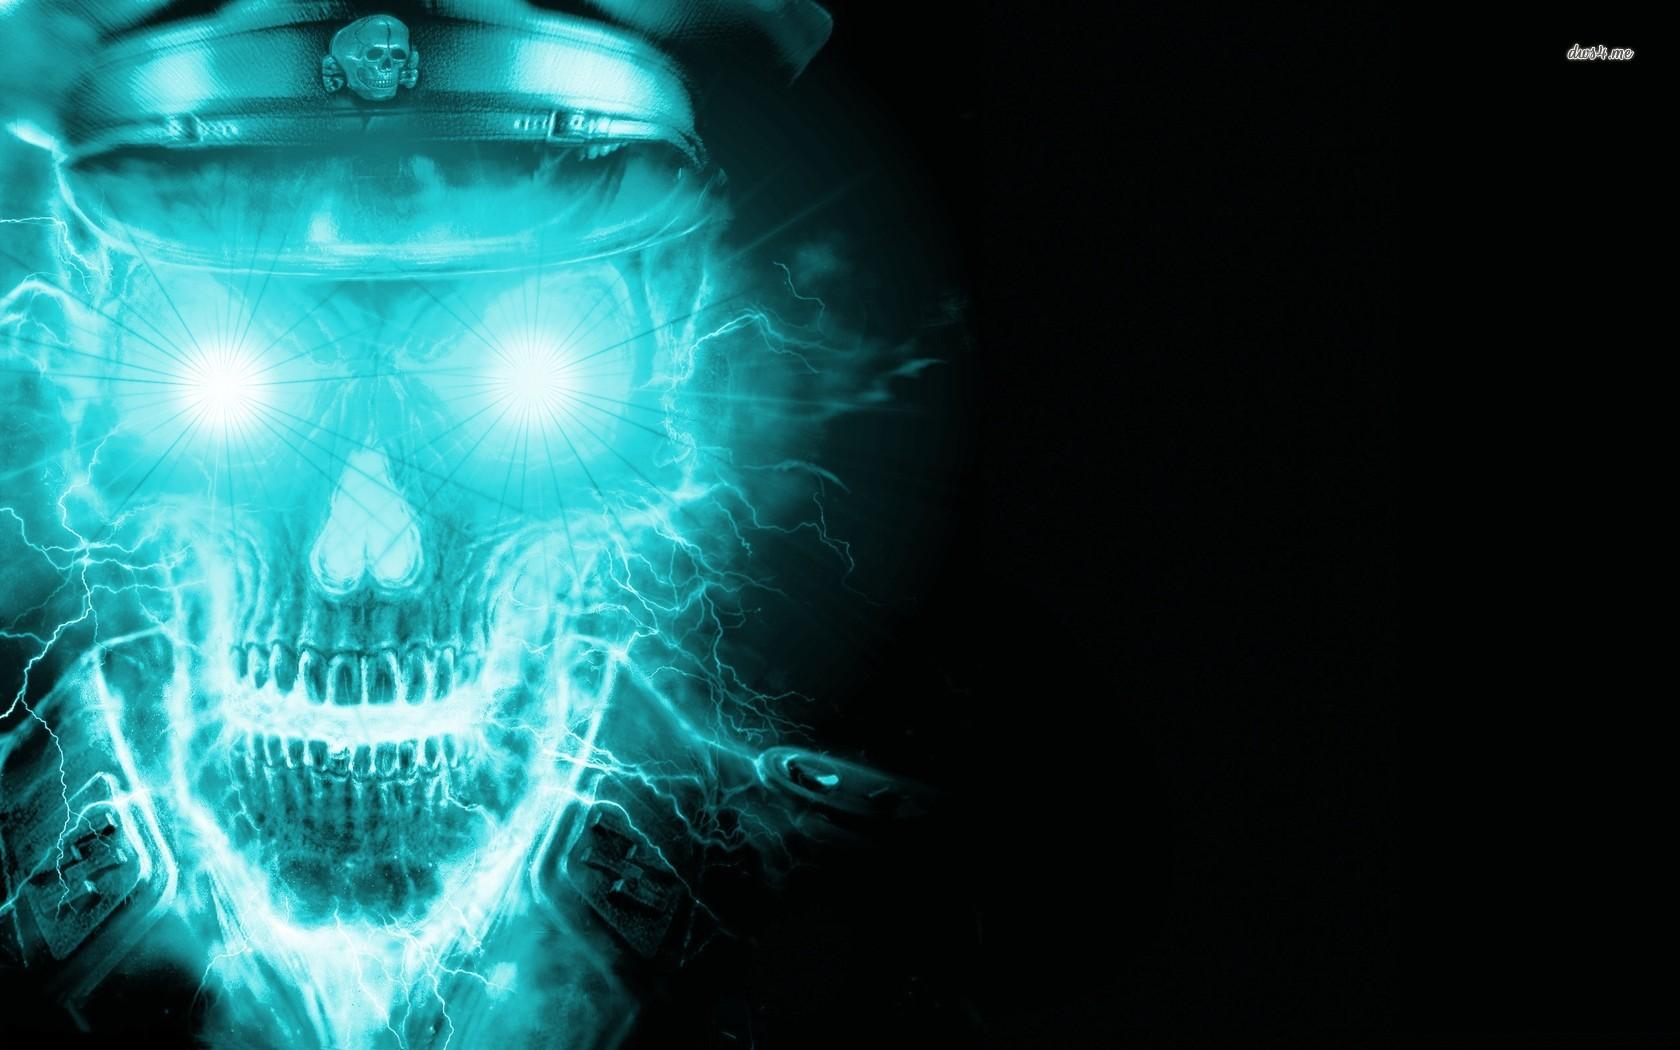 Glowing Skull Wallpapers - Top Free Glowing Skull Backgrounds ...